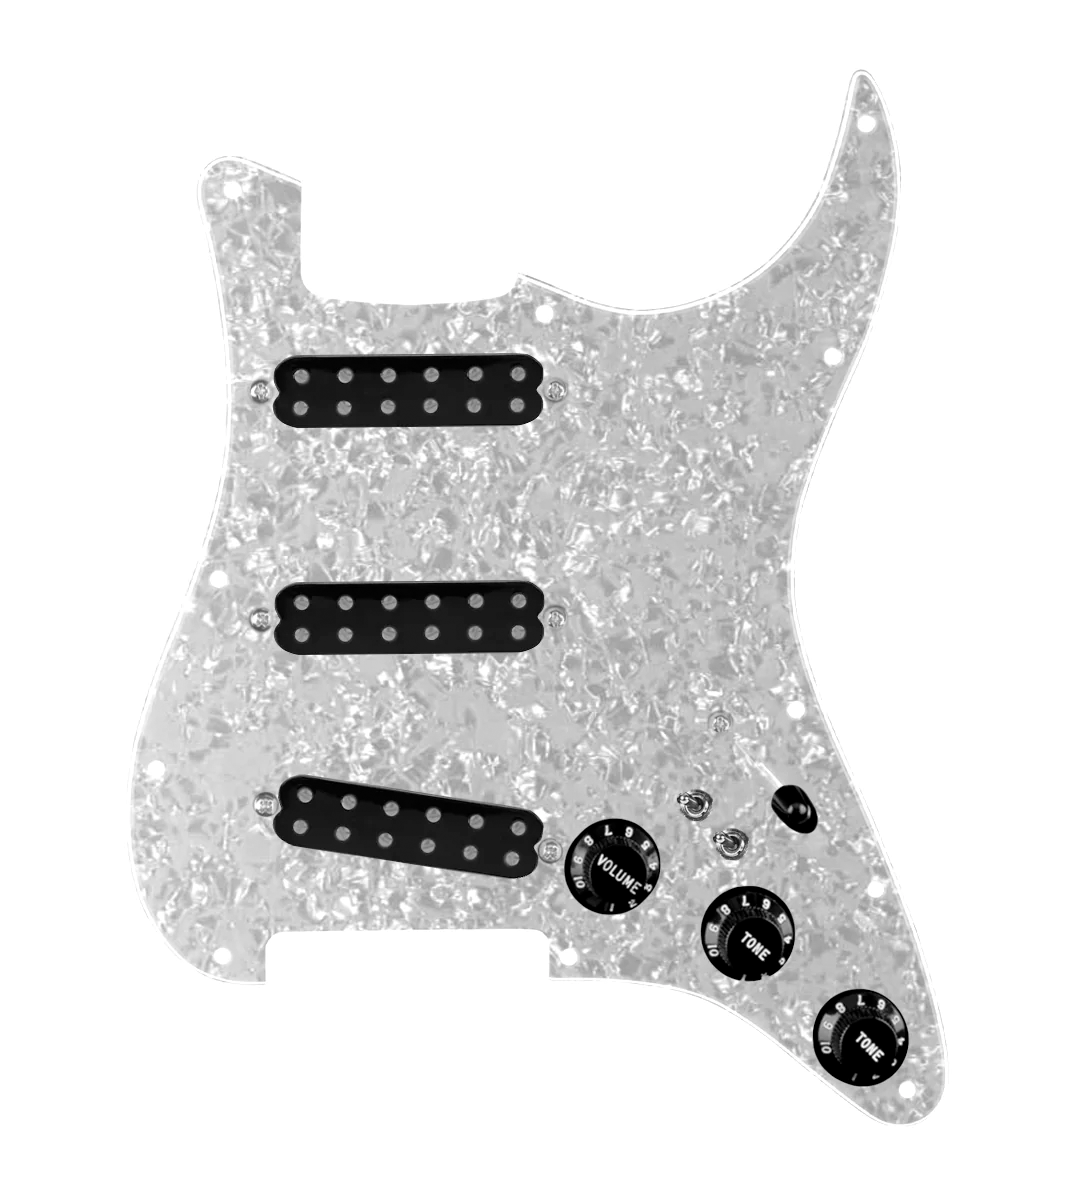 Polyphonics Loaded Pickguard for Stratocasters® - SLPG-POLY-B-WPPG-S7W